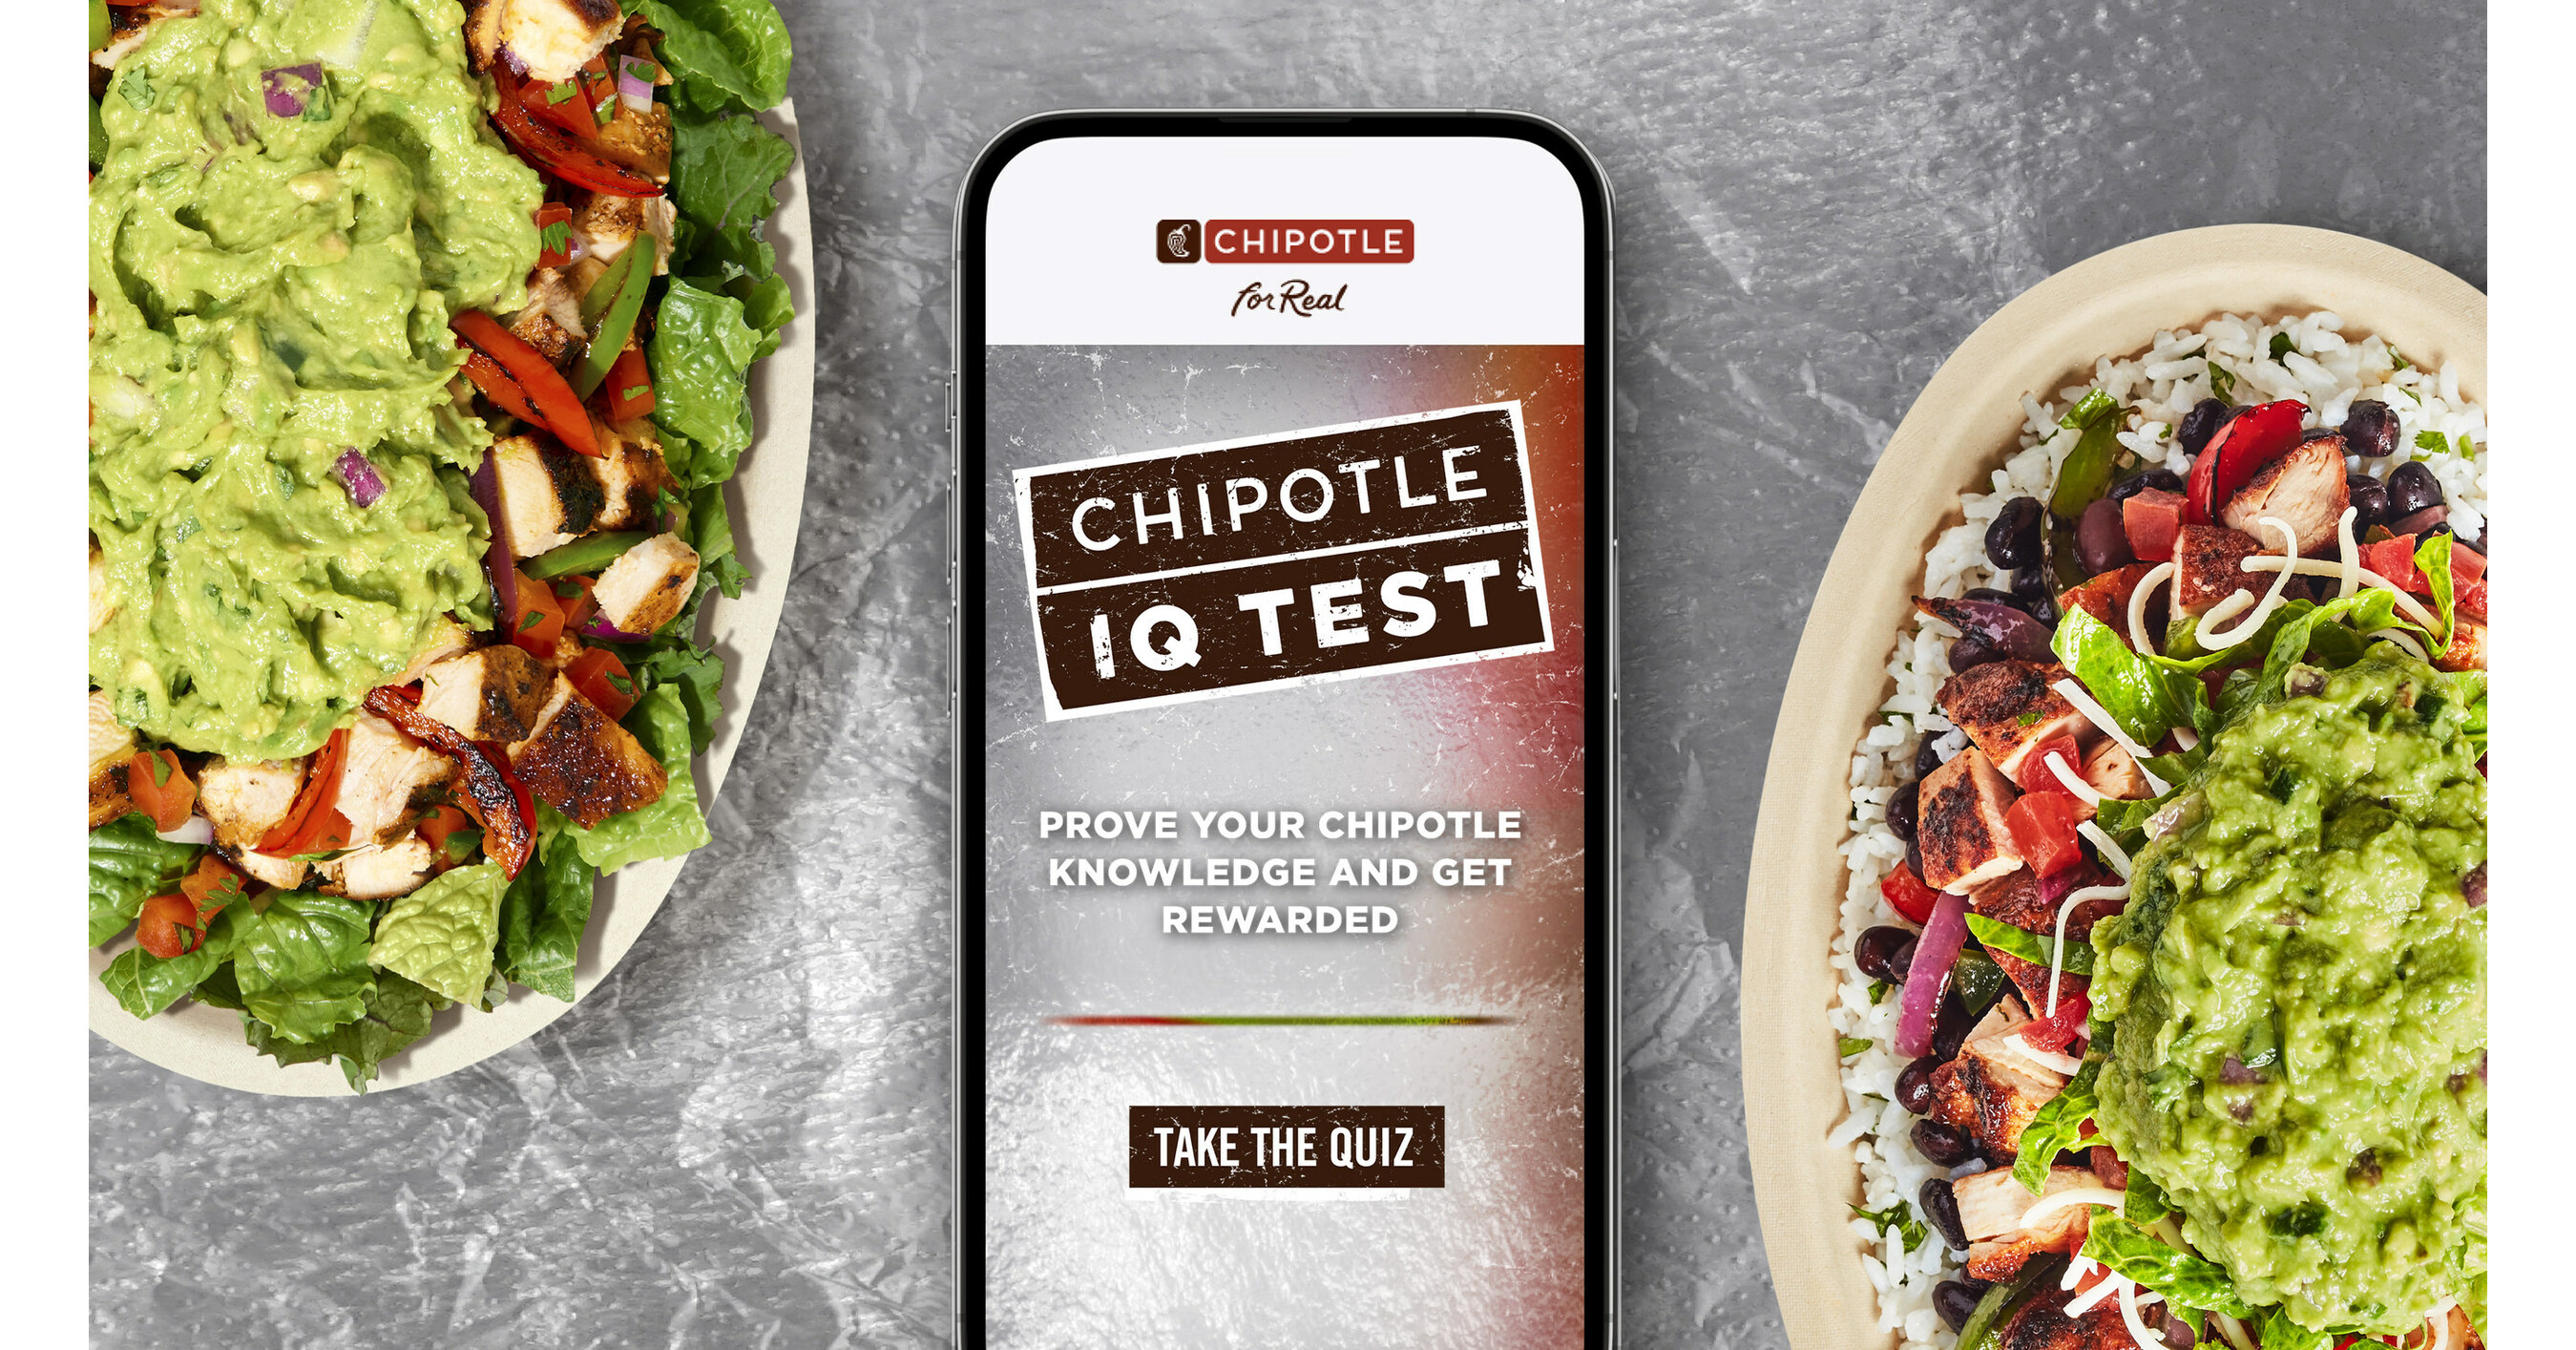 CALLING ALL TRIVIA EXPERTS! CHIPOTLE IQ IS BACK IN SESSION WITH 250,000